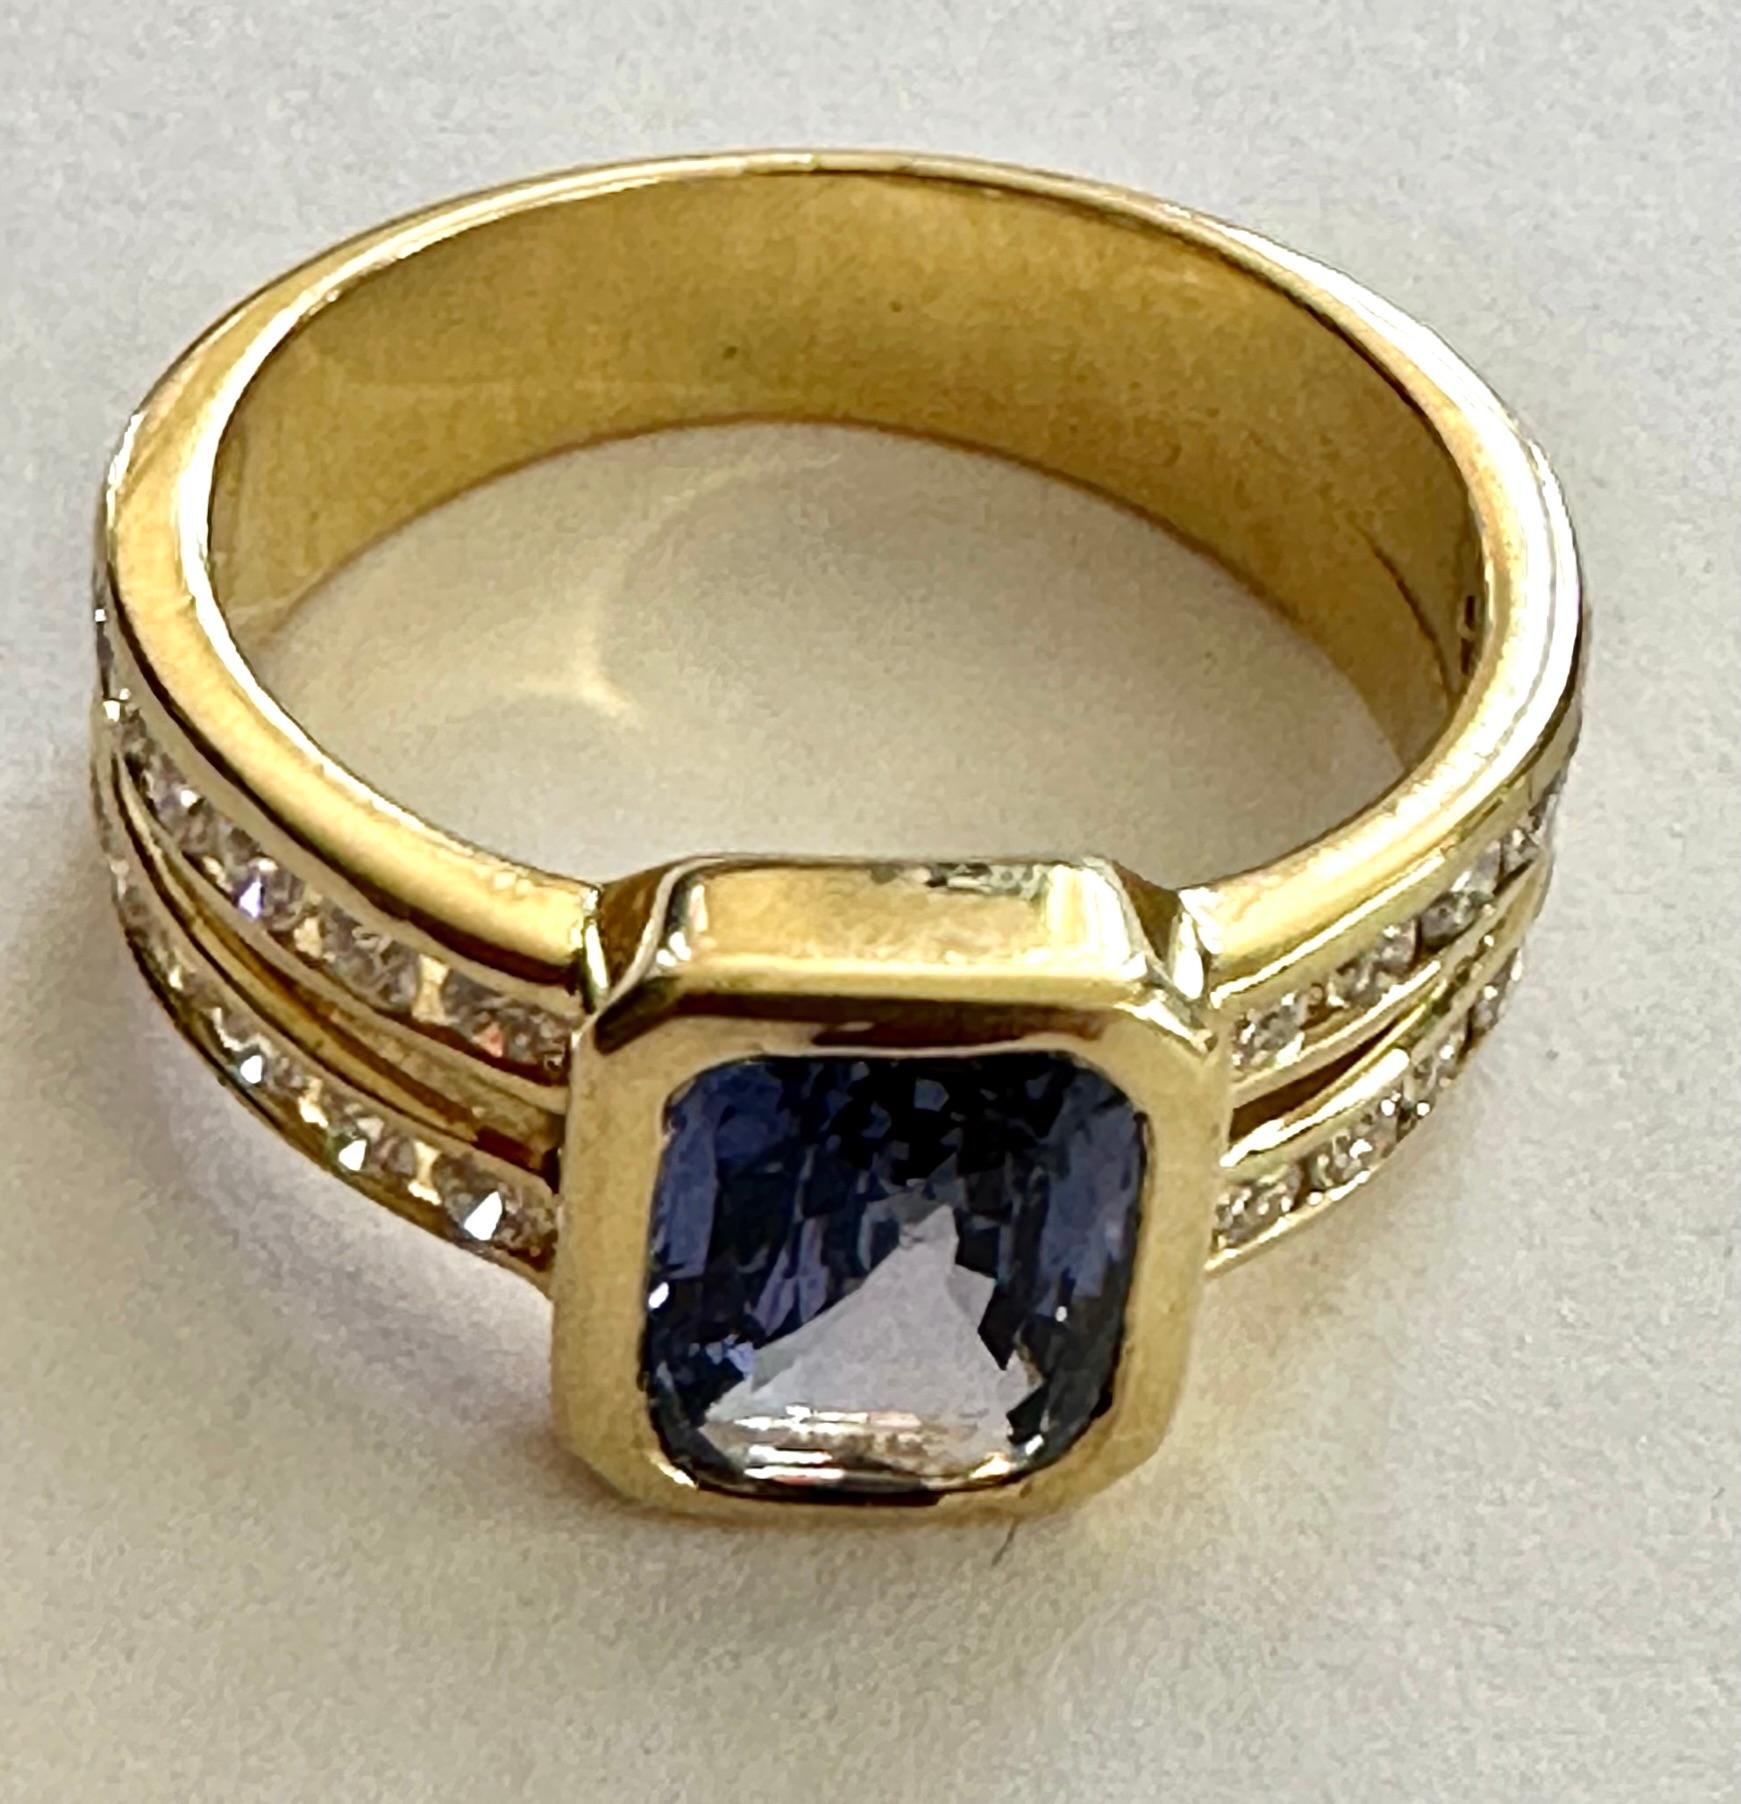 Brilliant Cut Natural Sapphire & Diamonds Ring in 18k Yellow Gold, Netherlands, circa 1960 For Sale